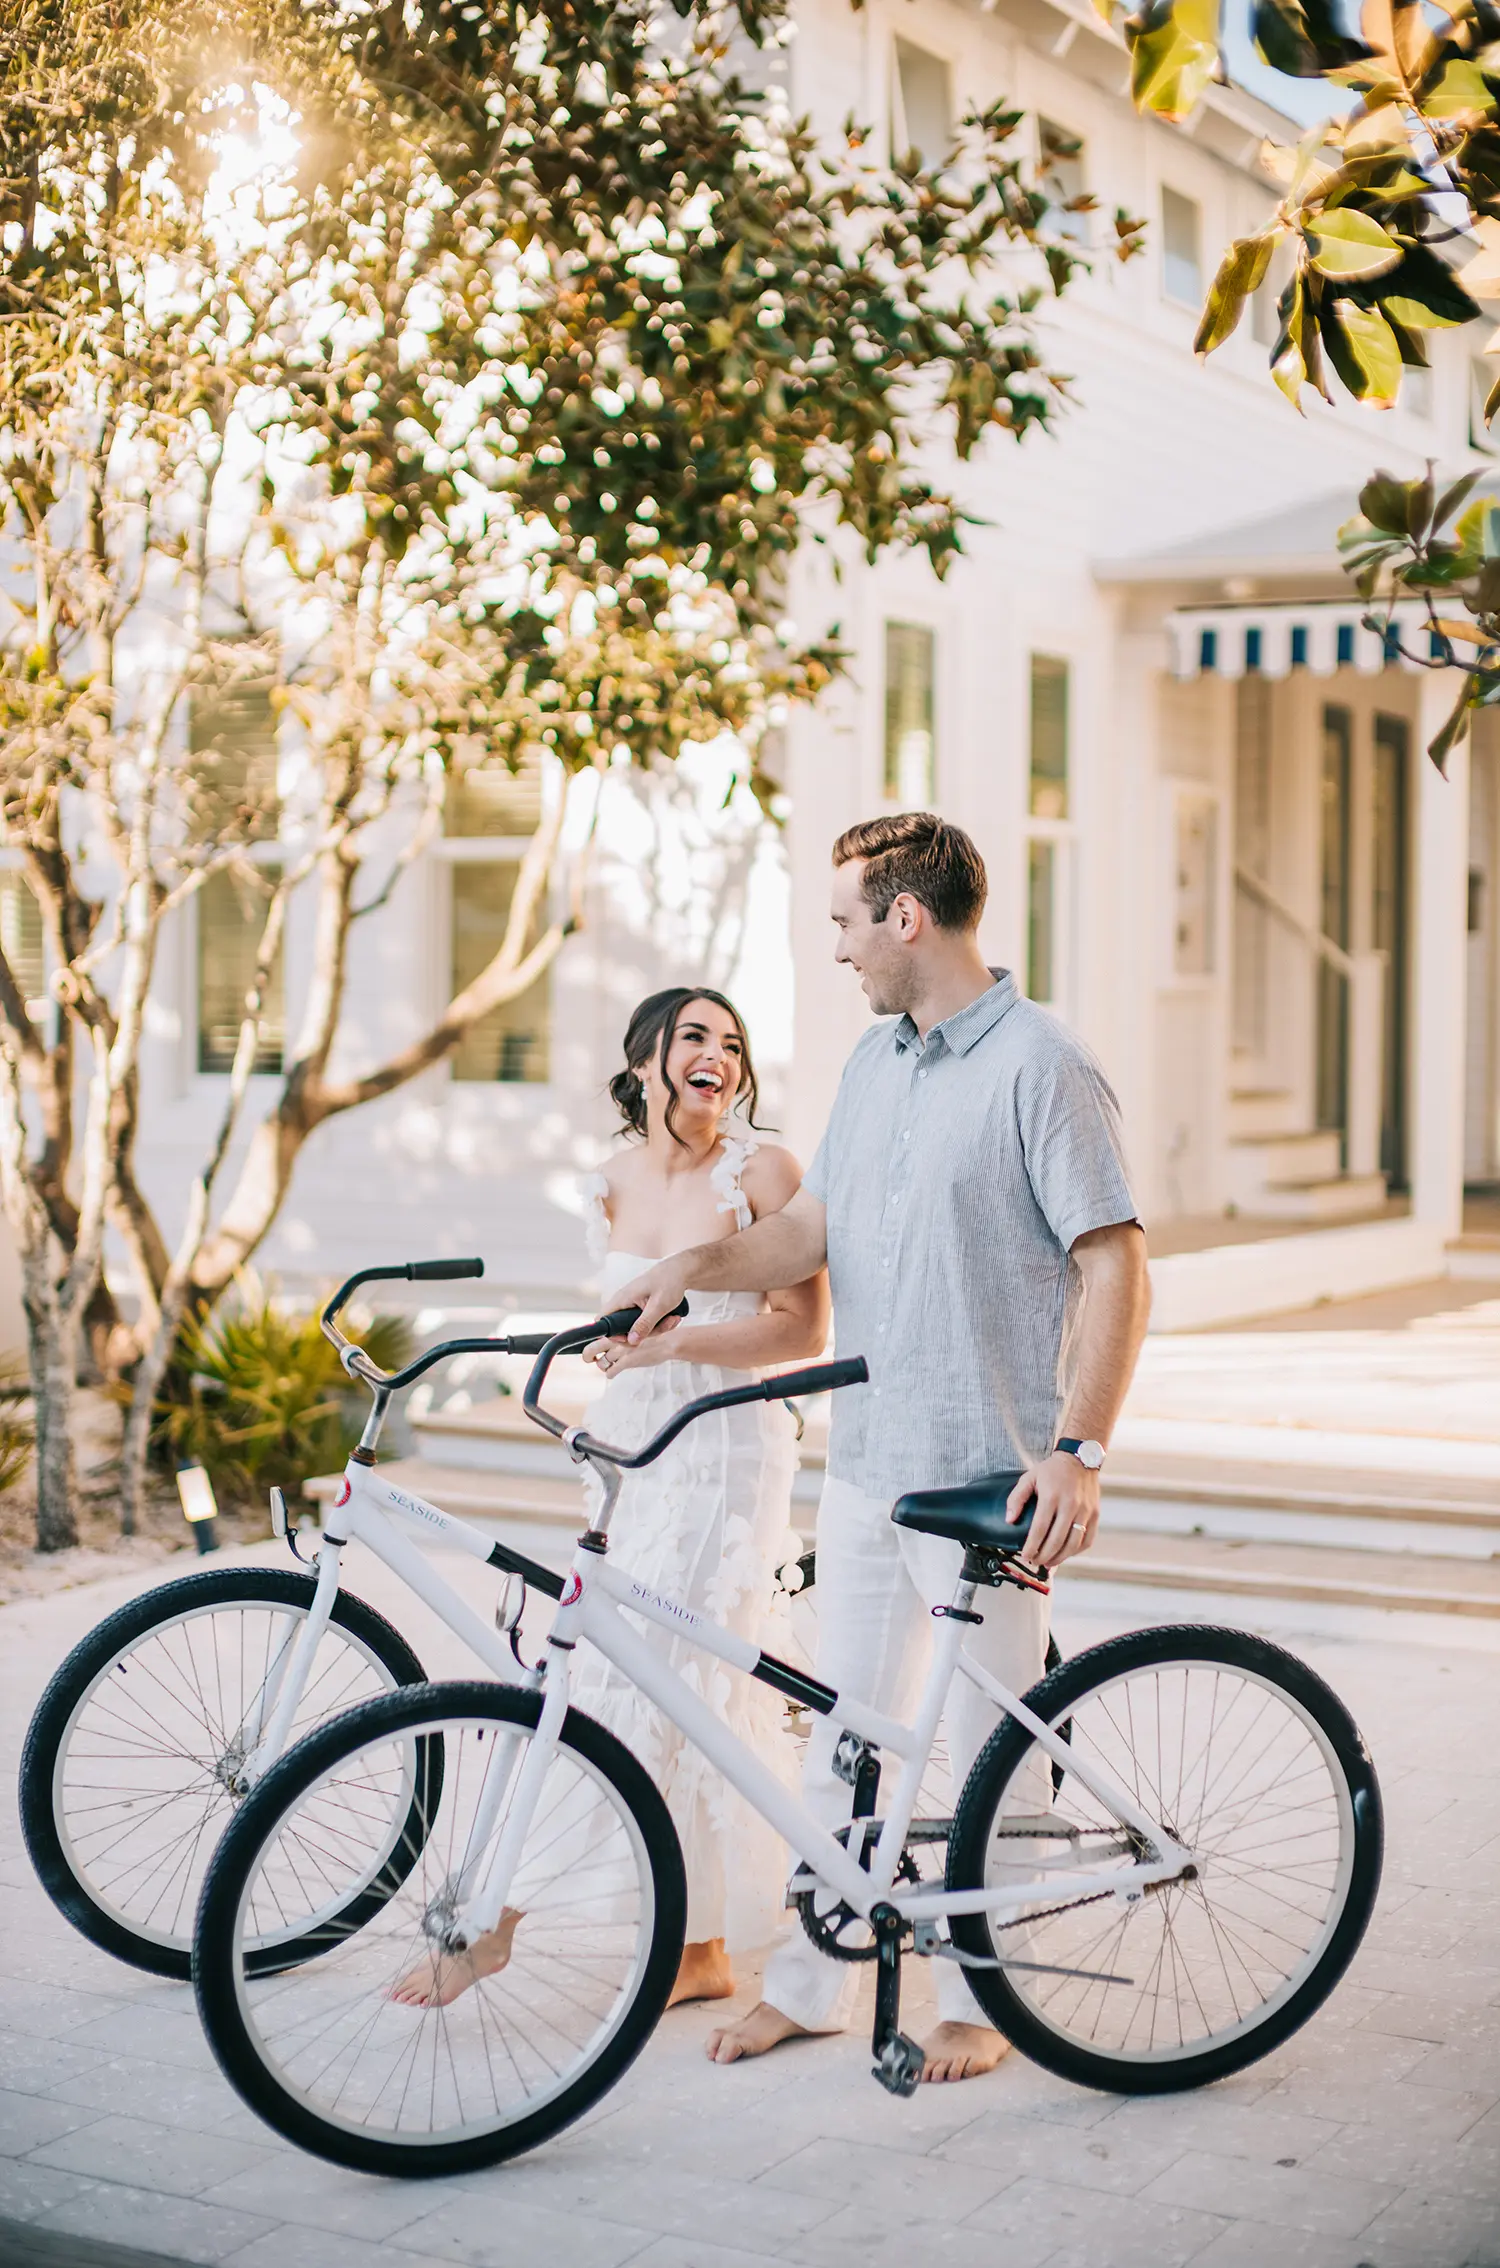 Picture of a man and woman on the street with bicycles